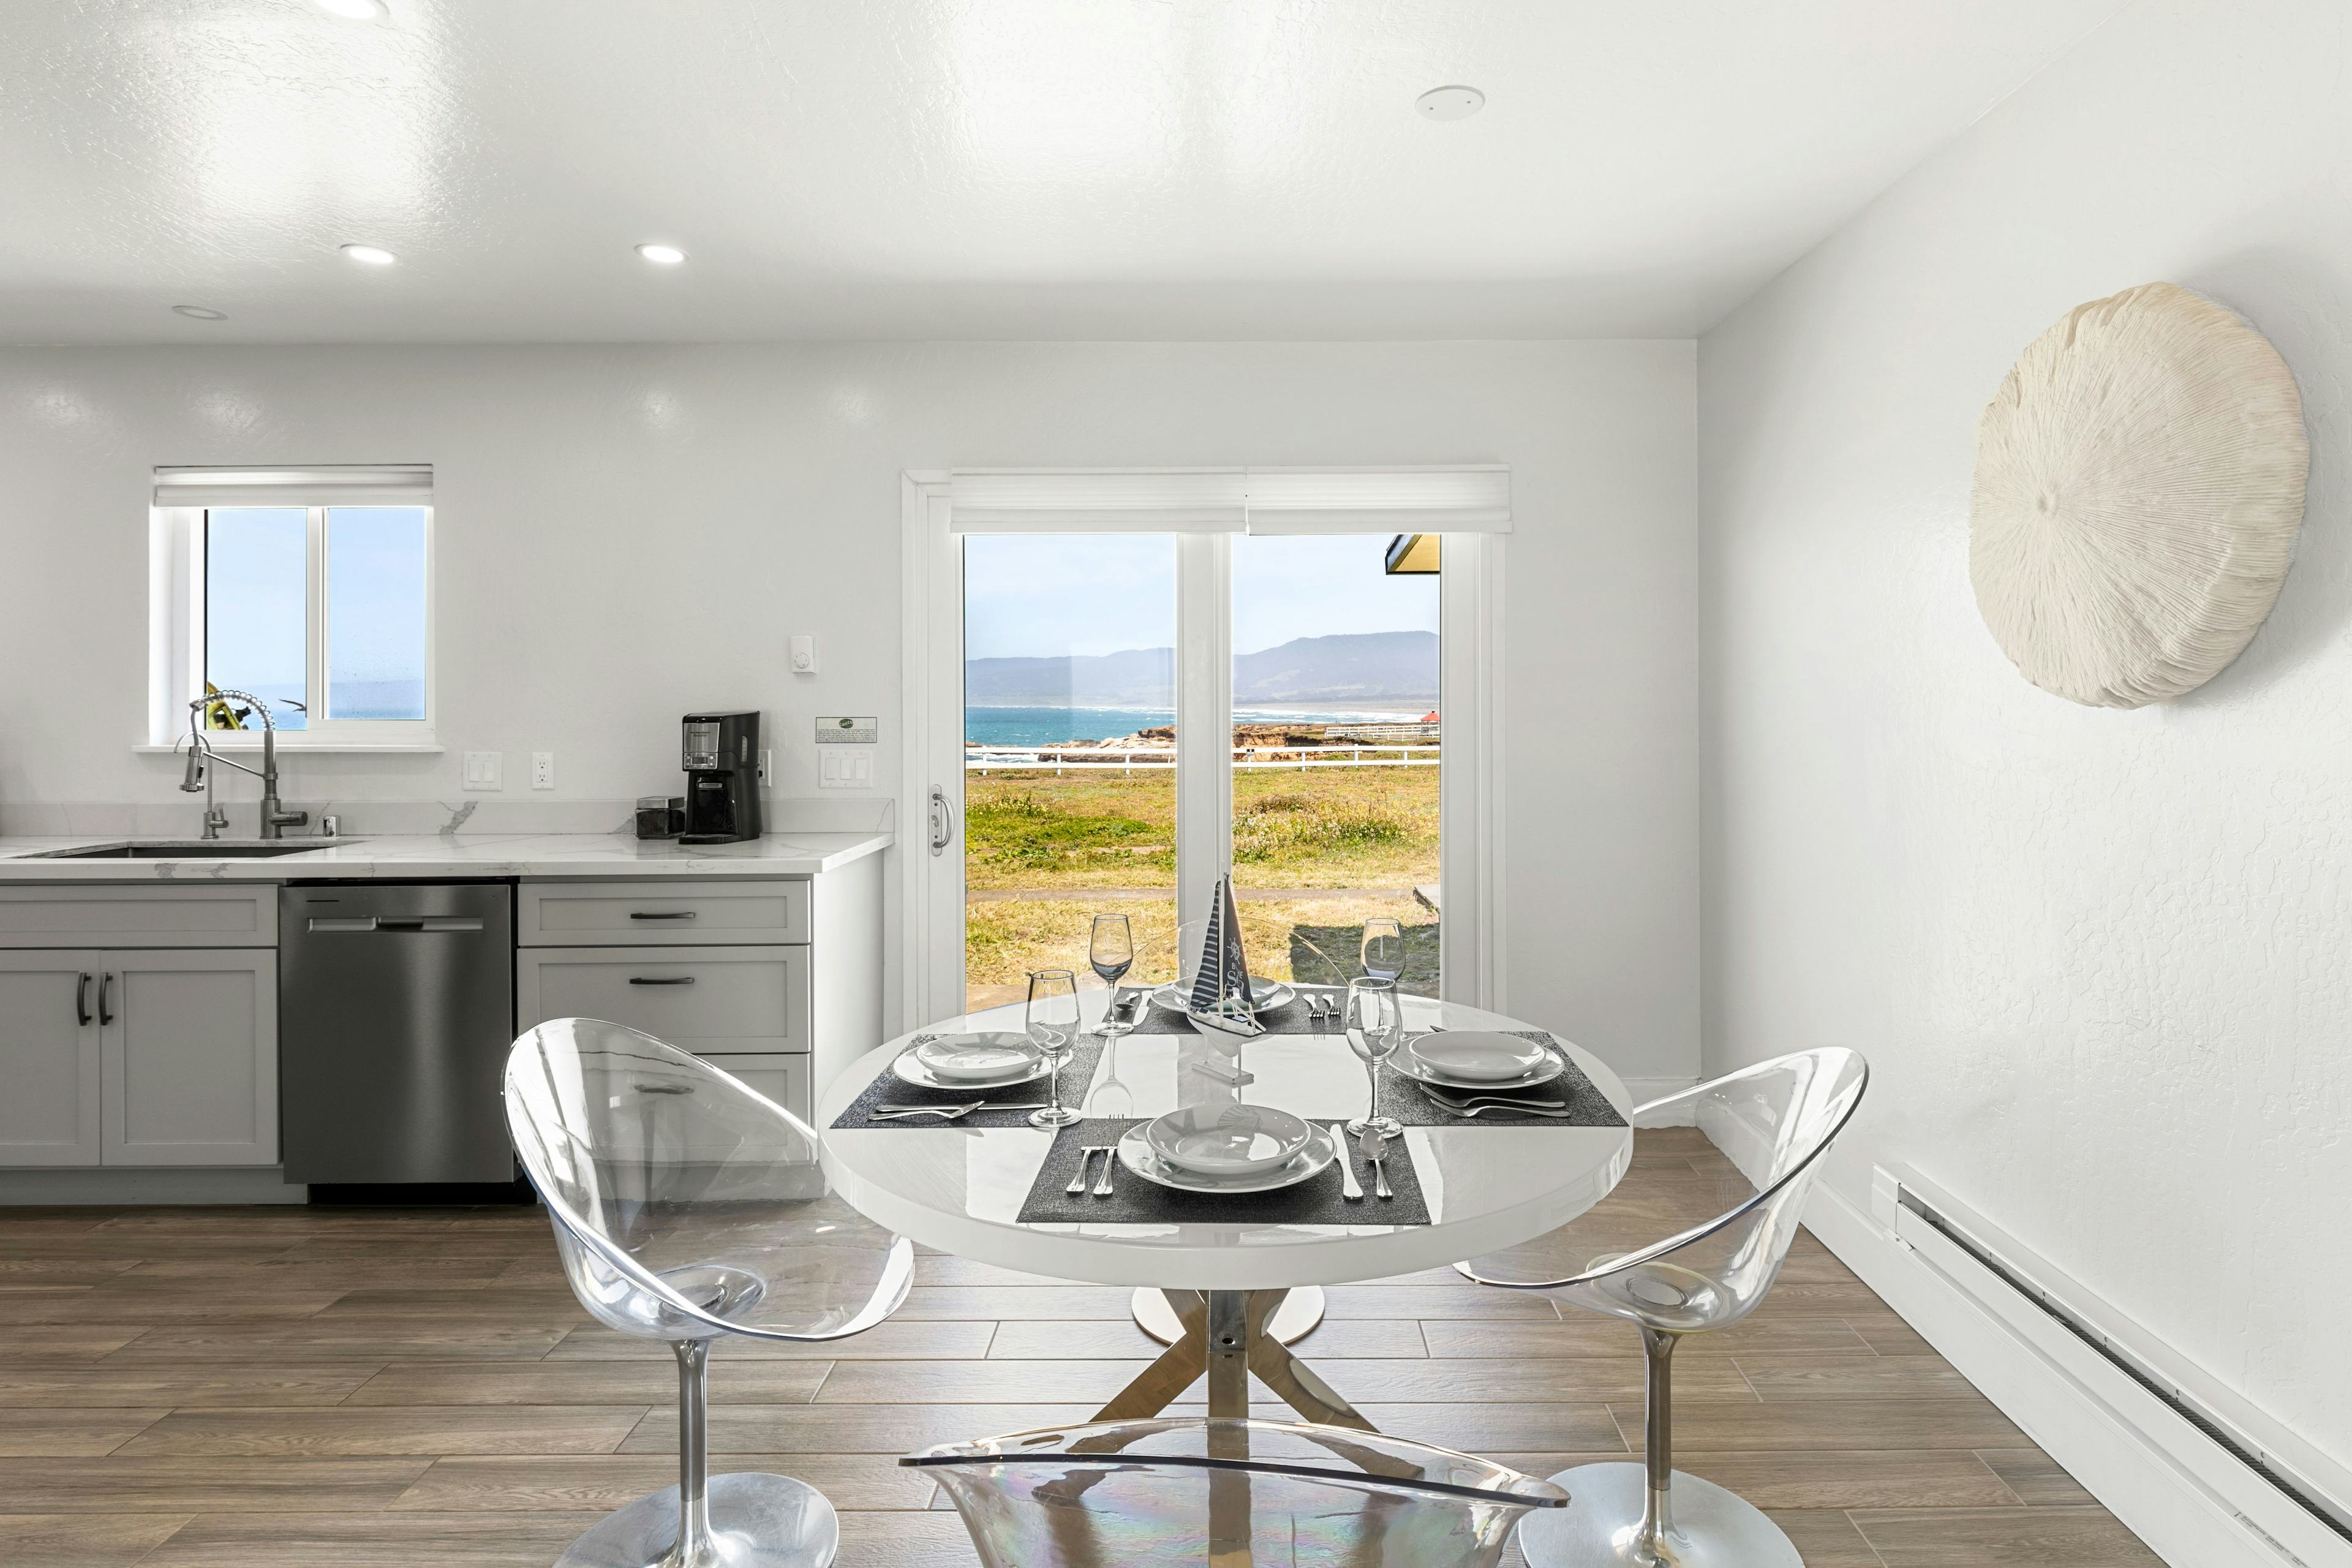 Gourmet kitchens with fabulous views